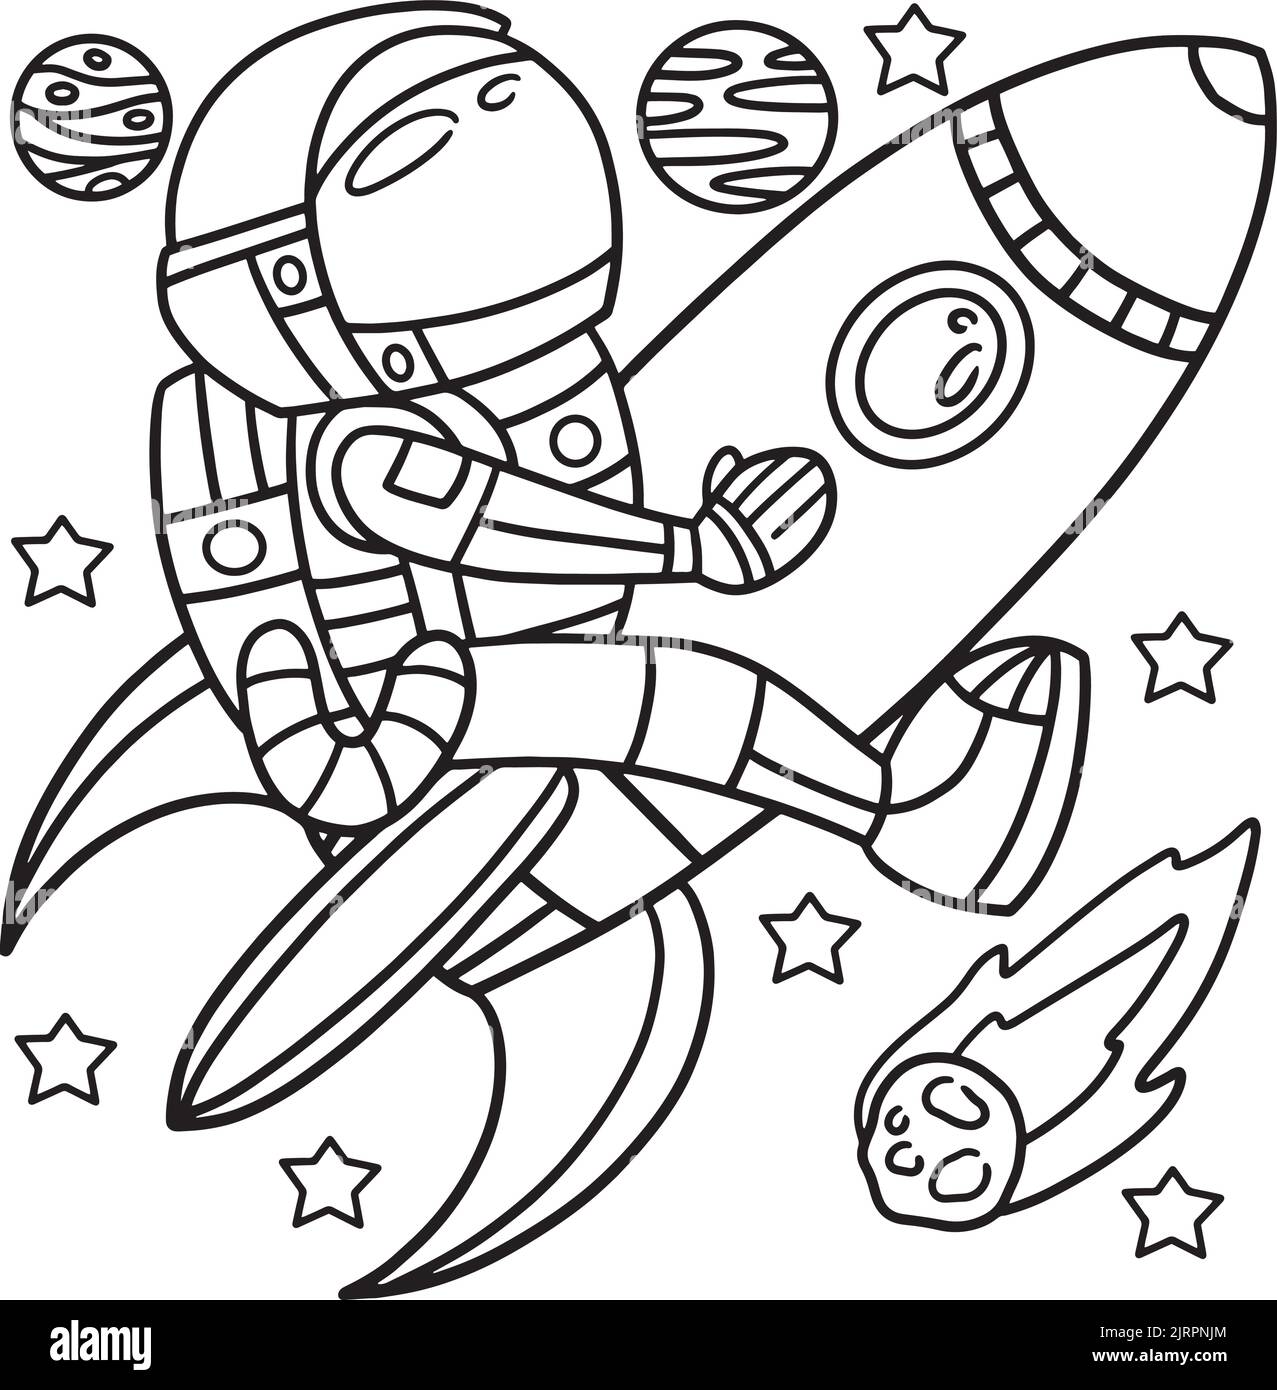 Astronaut Riding On A Rocket Ship Coloring Page Stock Vector